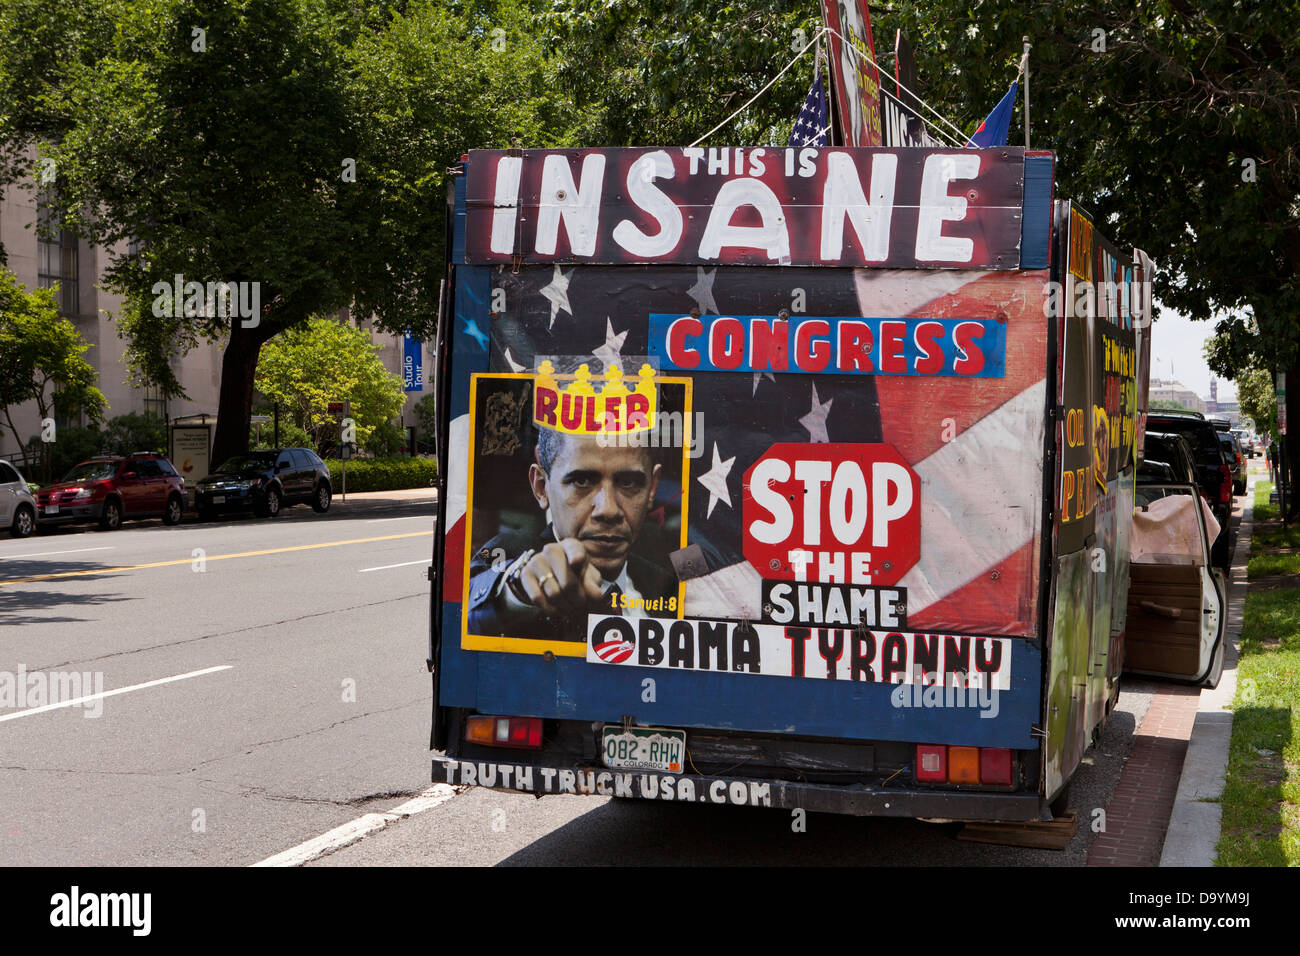 Car decorated with far-right political messages - Washington, DC Stock Photo